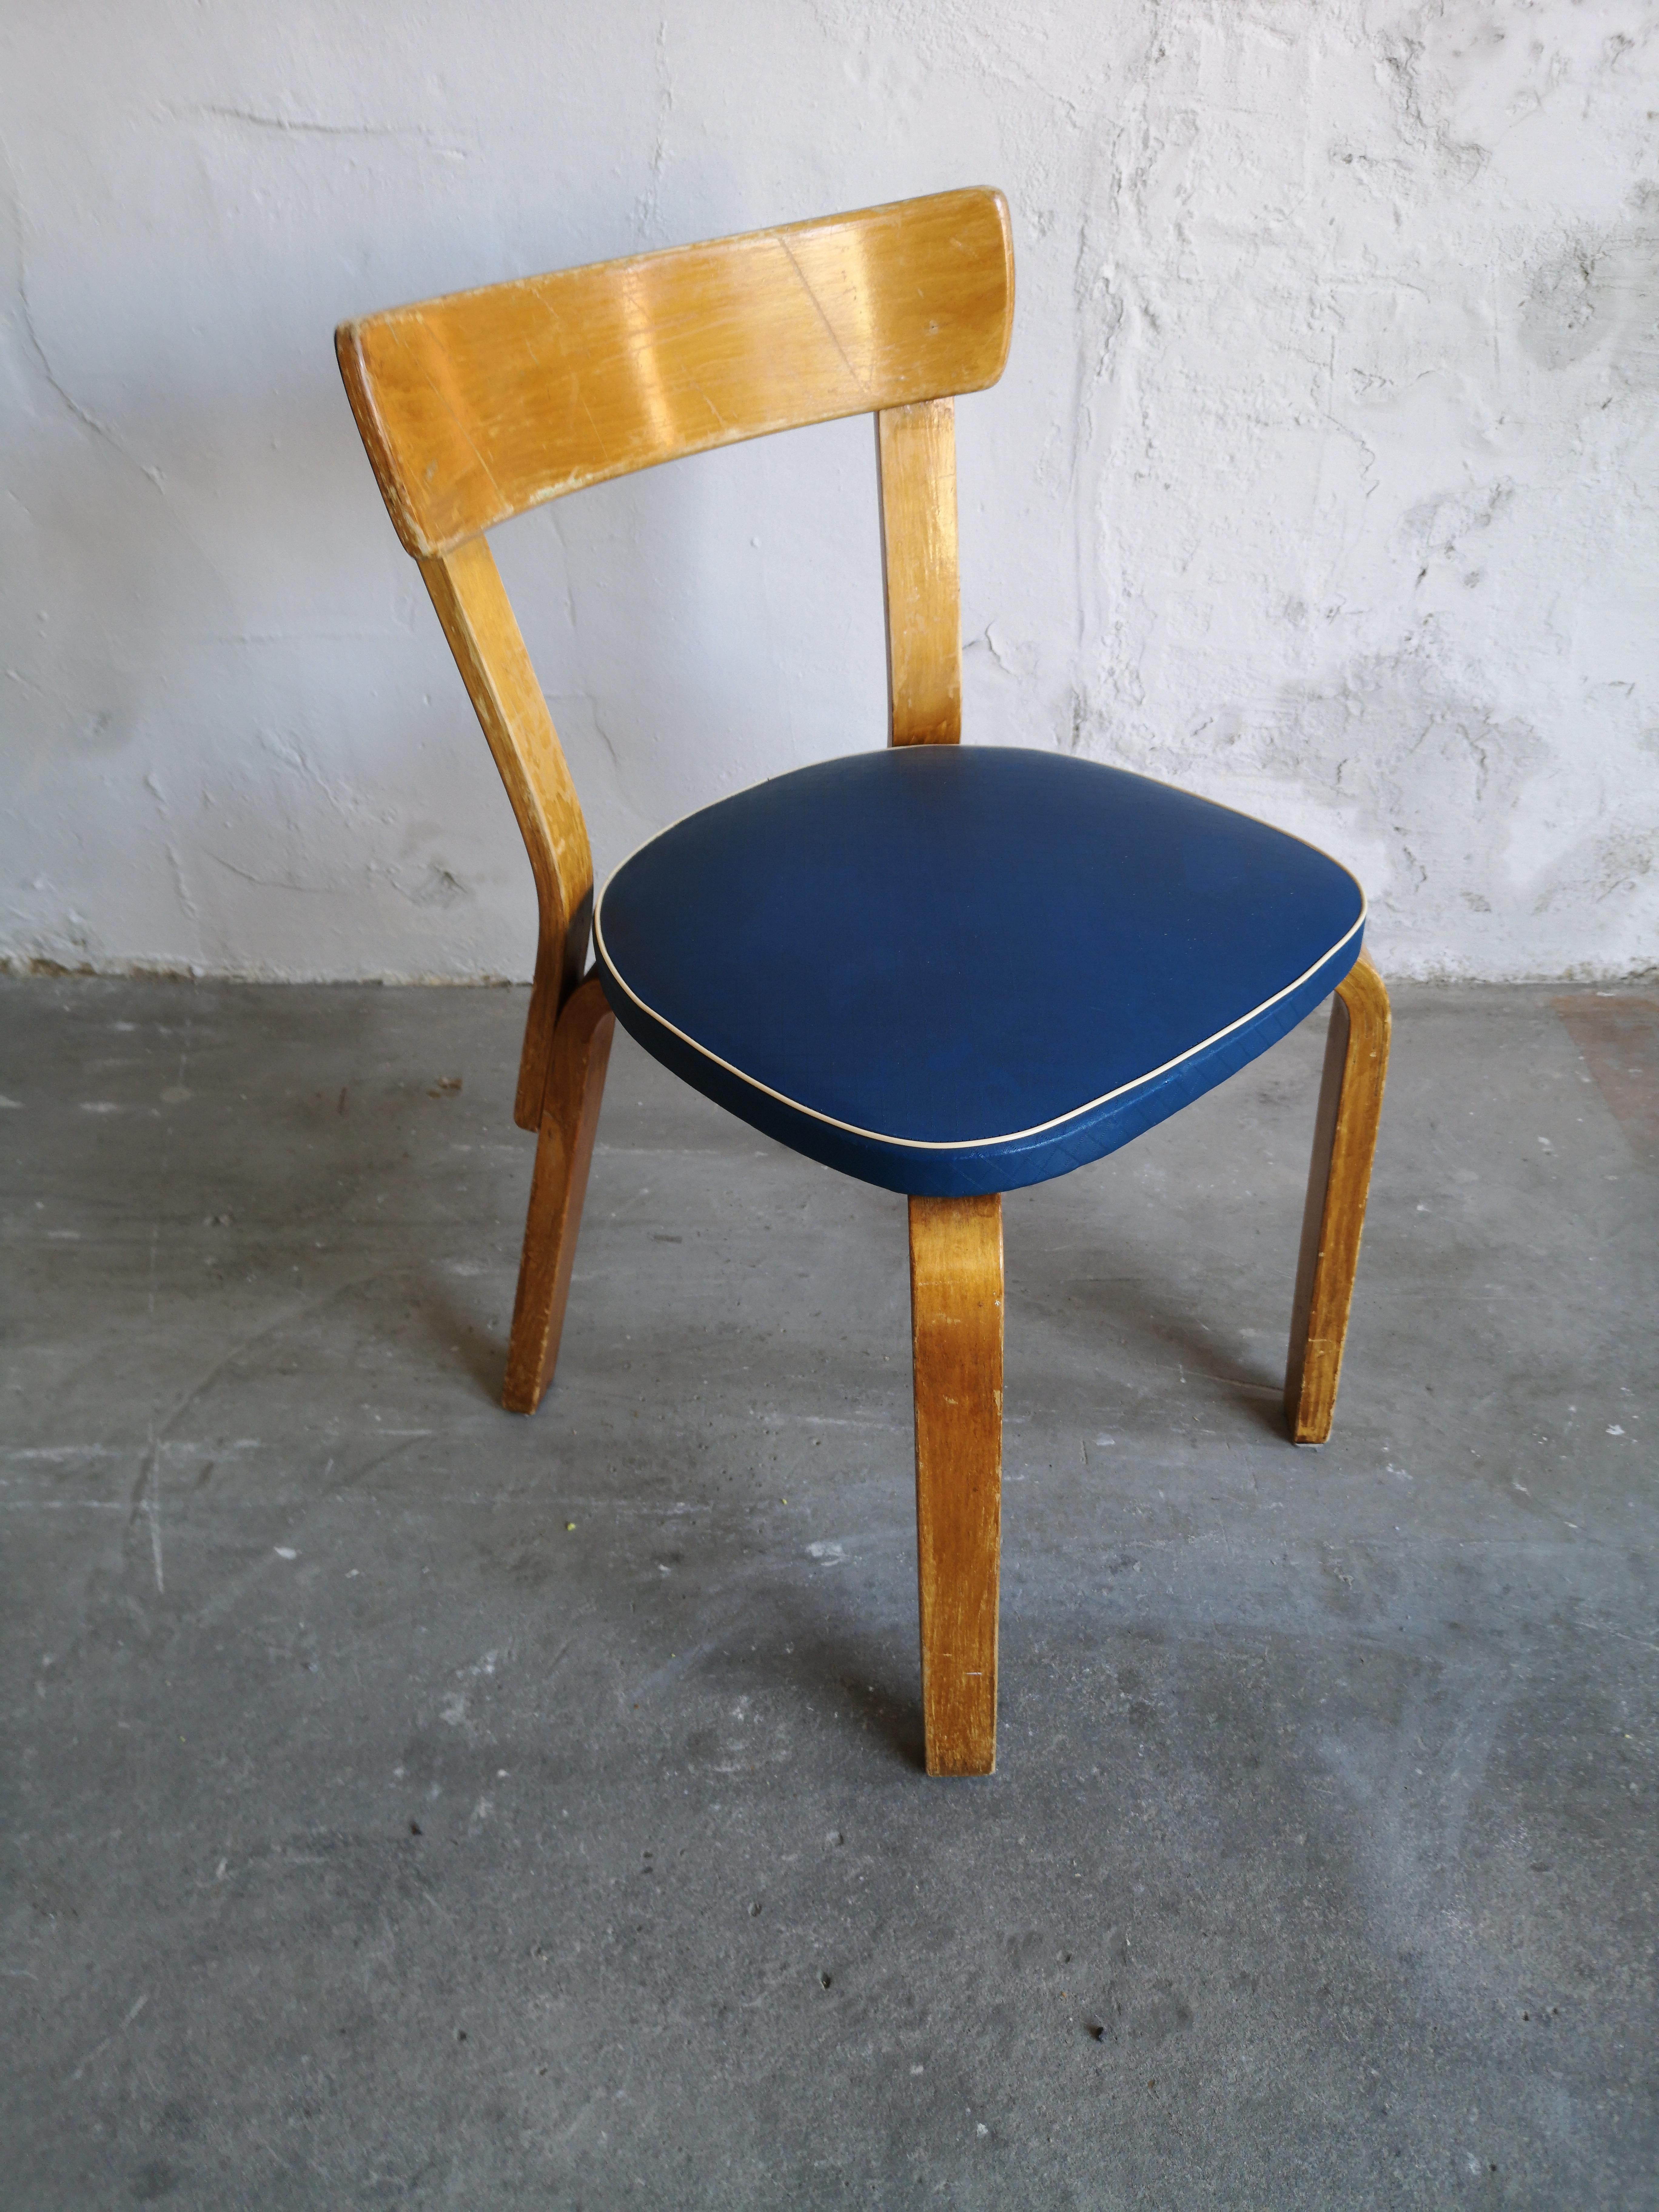 A stunning vintage Alvar Aalto chair 69 with vinyl upholstery. The vinyl has no rips or tears. The chair is solid and doesn't wobble.